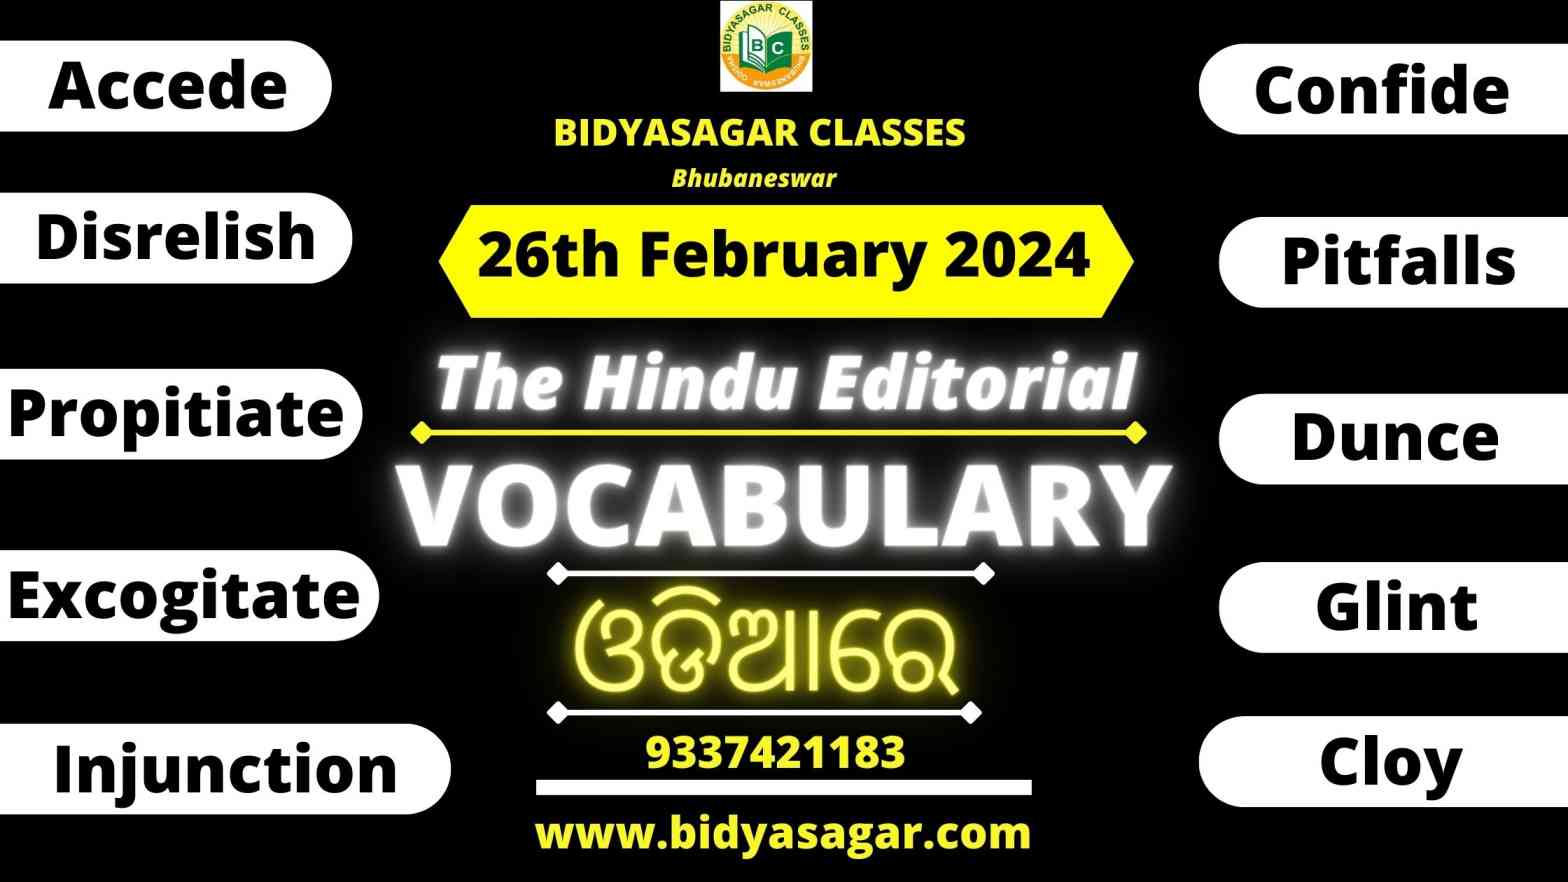 The Hindu Editorial Vocabulary of 26th February 2024